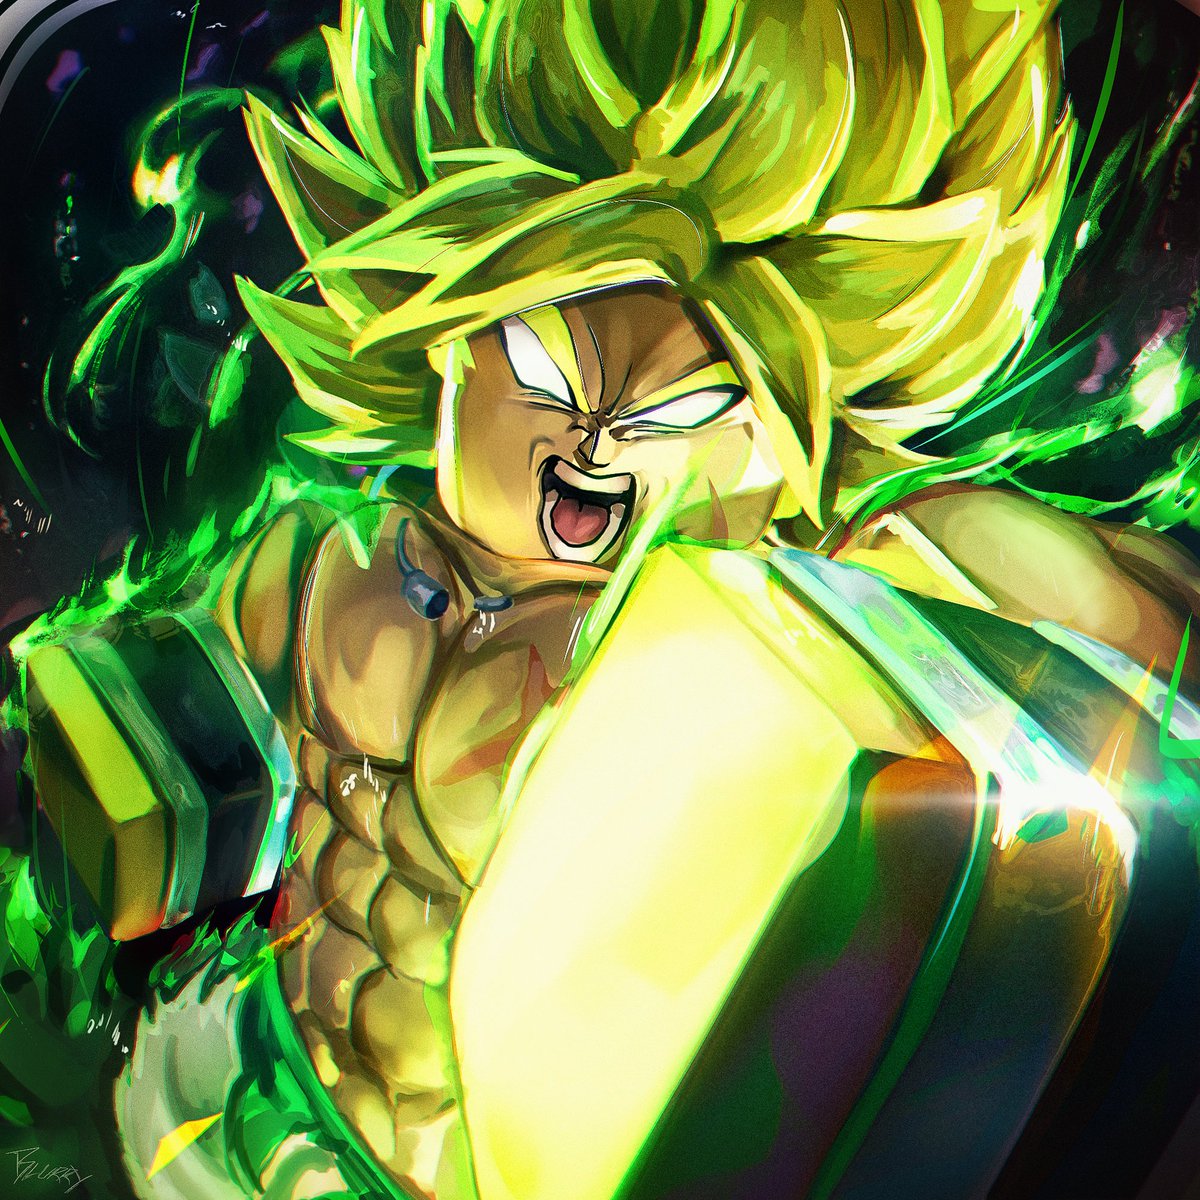 BROLY GFX

 Commissioned Work 

Commissions OPEN: 1_Blurry ON DISCORD  

My portfolio: discord.gg/4KN5nByRR7 

#robloxgfx #robloxdev #roblox